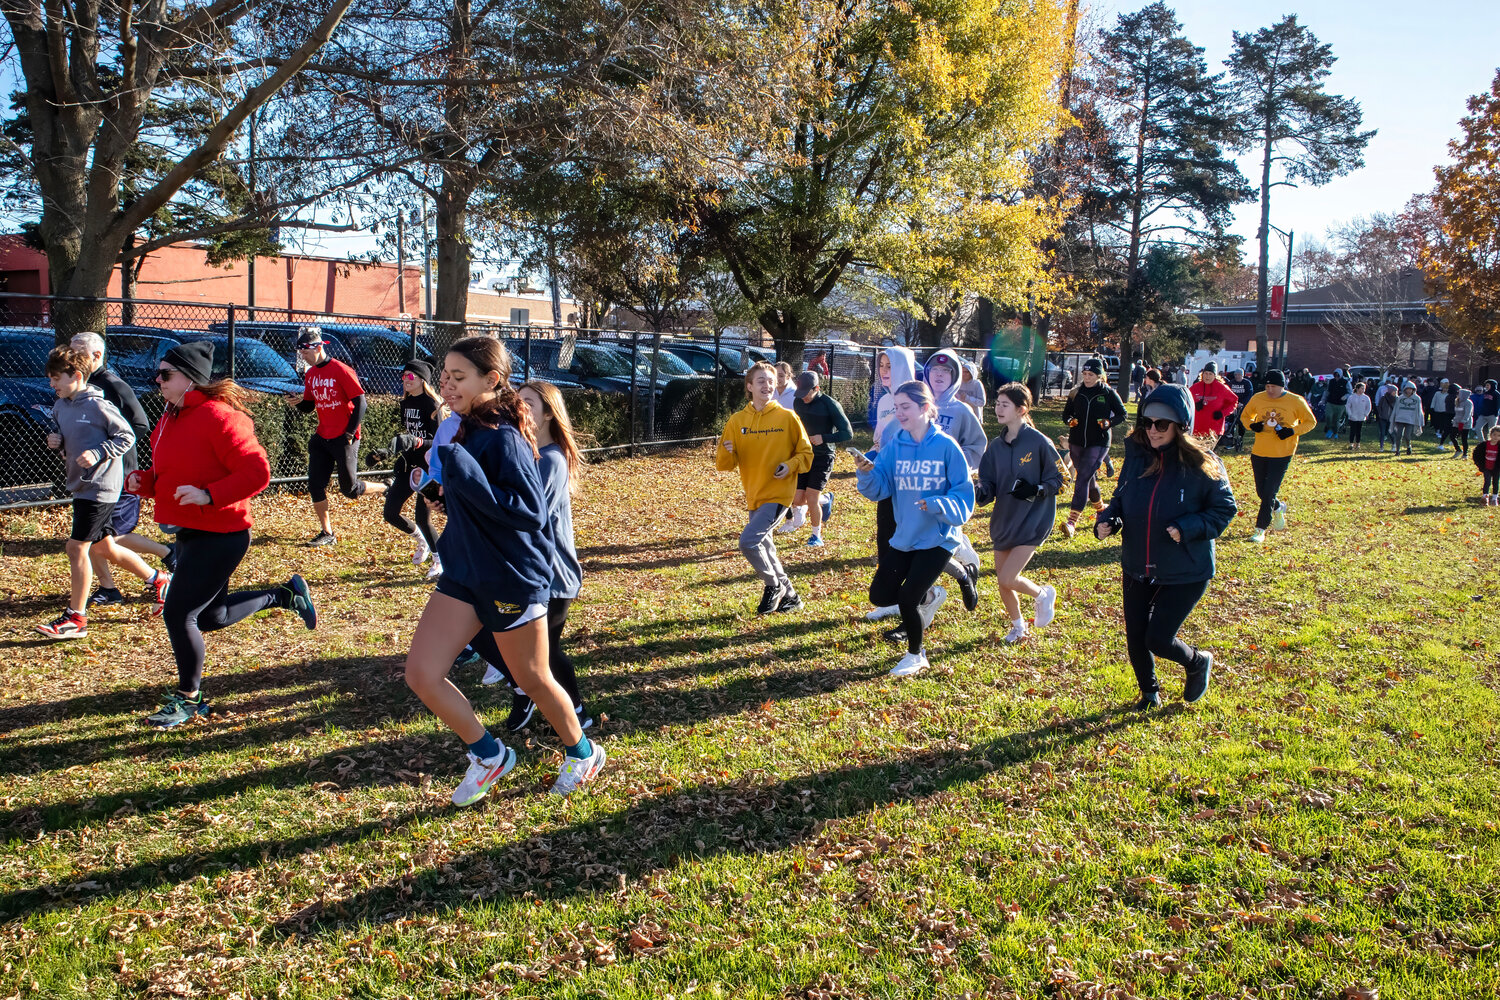 Ready, set, go! At 9:30 on Thanksgiving morning, these neighbors ran 5 kilometers to help provide resources to young hospital patients.